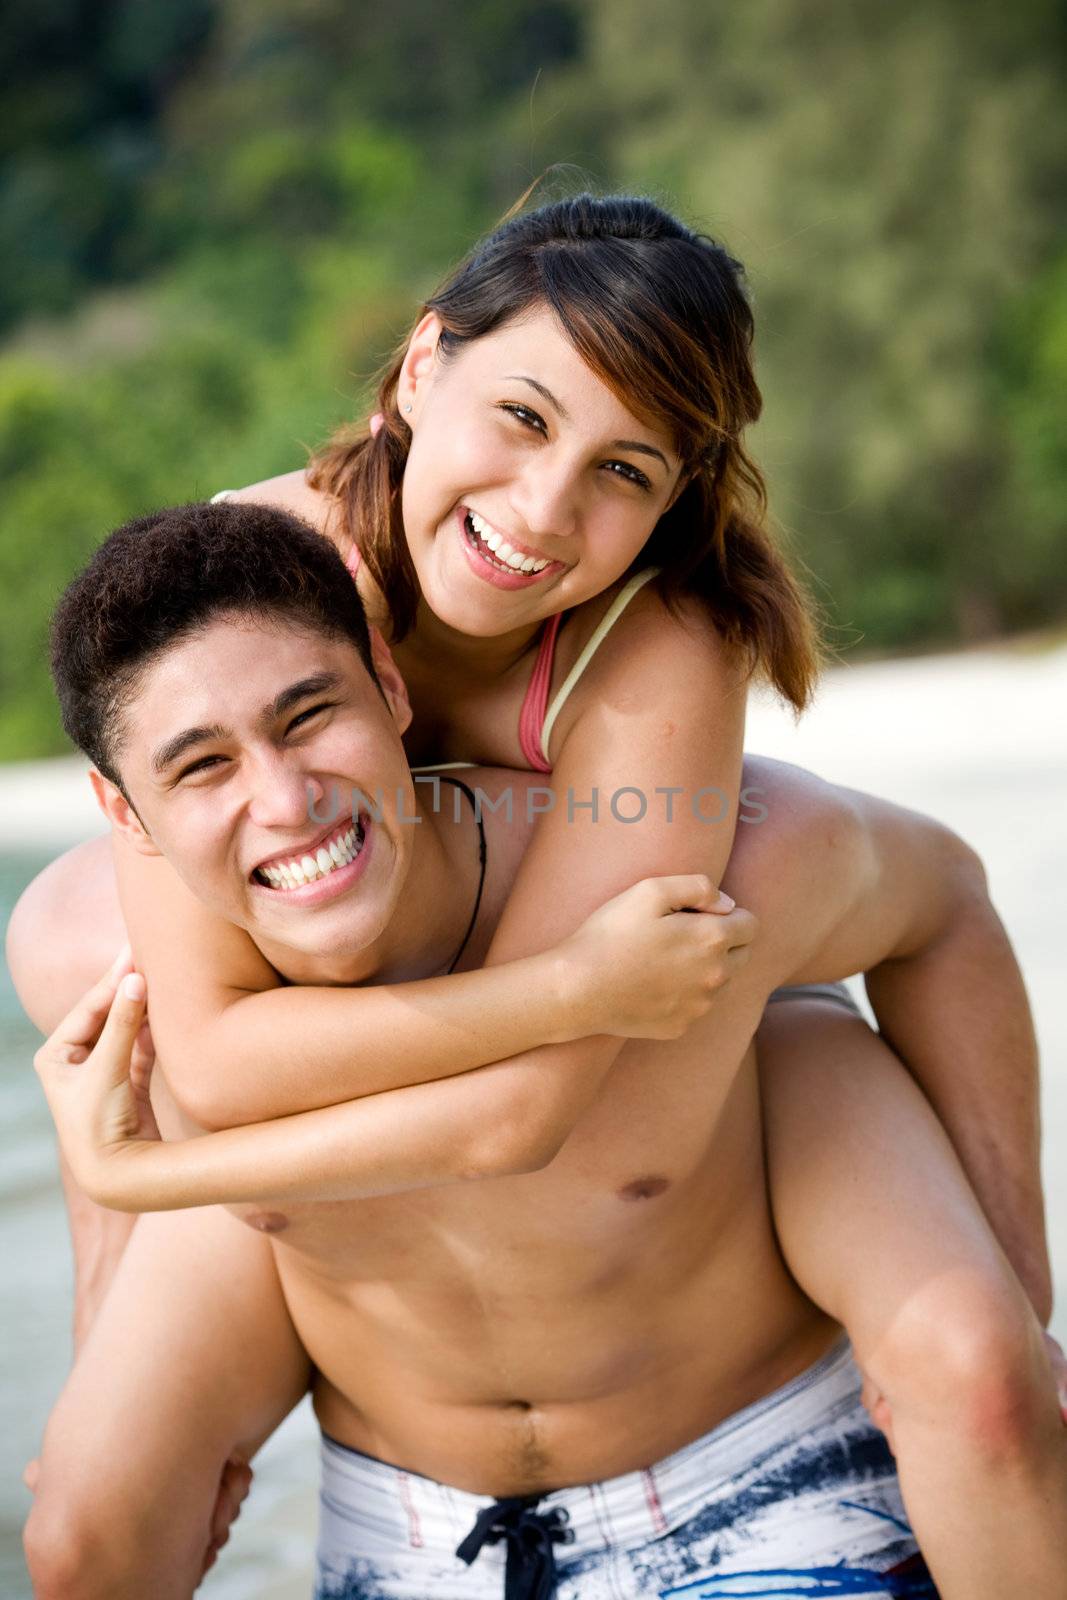 couple having fun at the beach by piggyback carrying